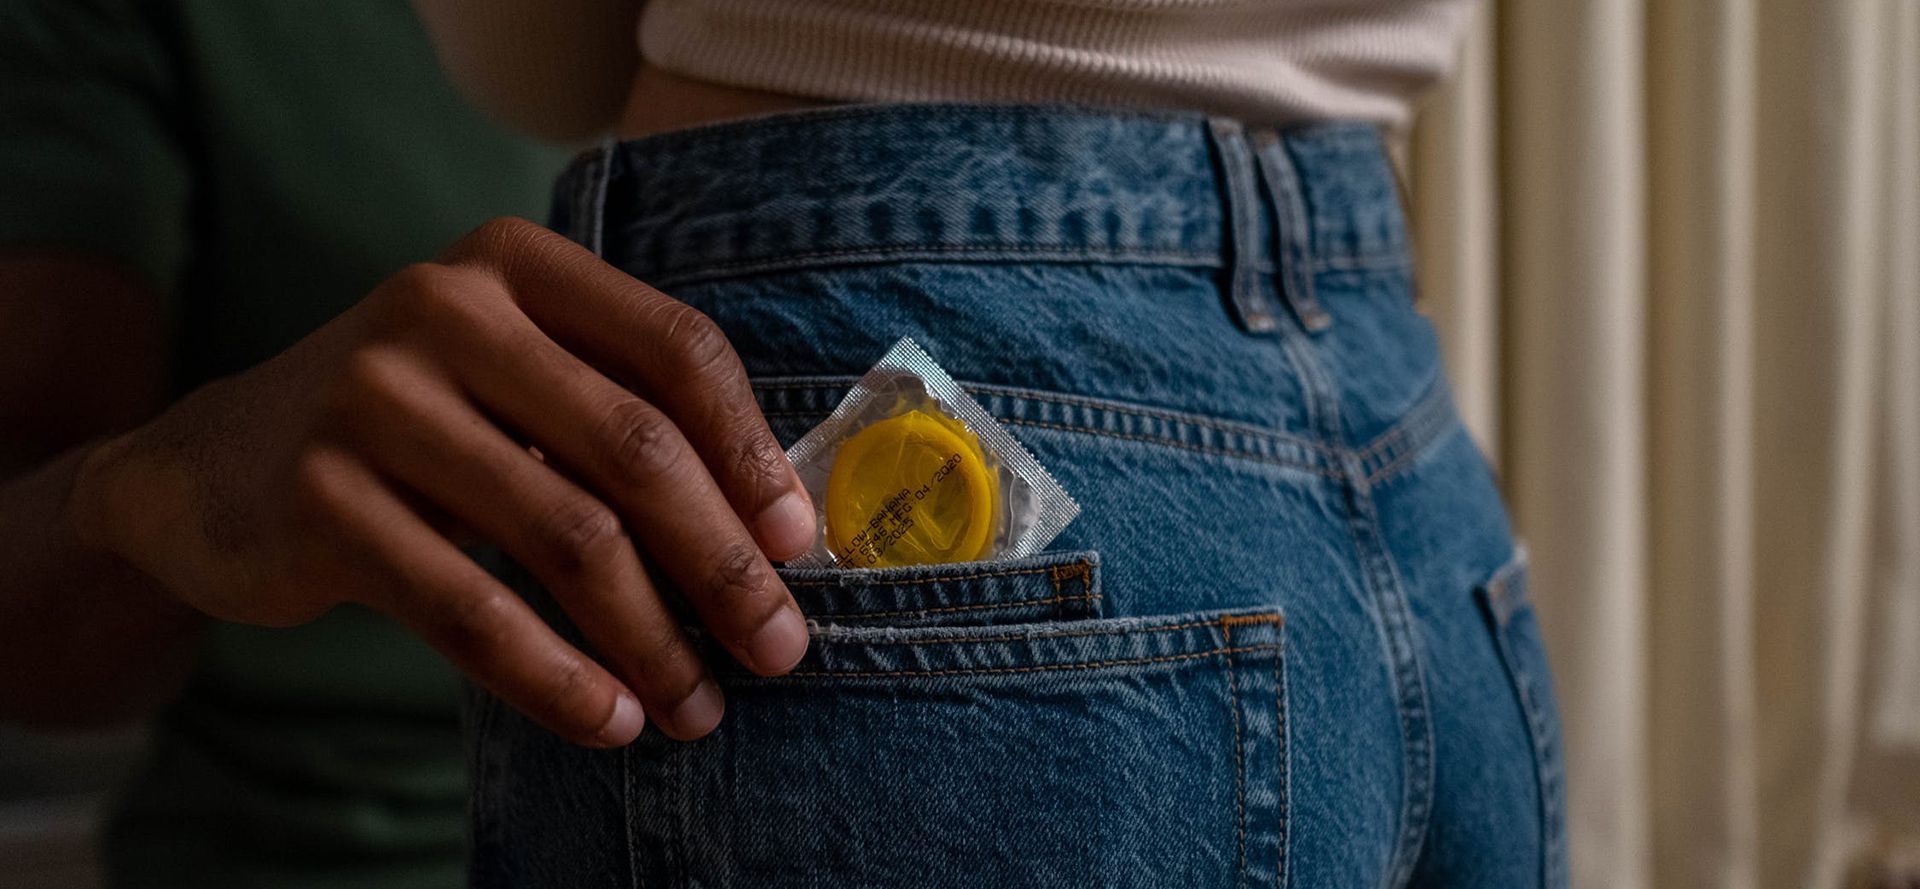 A man takes a condom out of pocket.